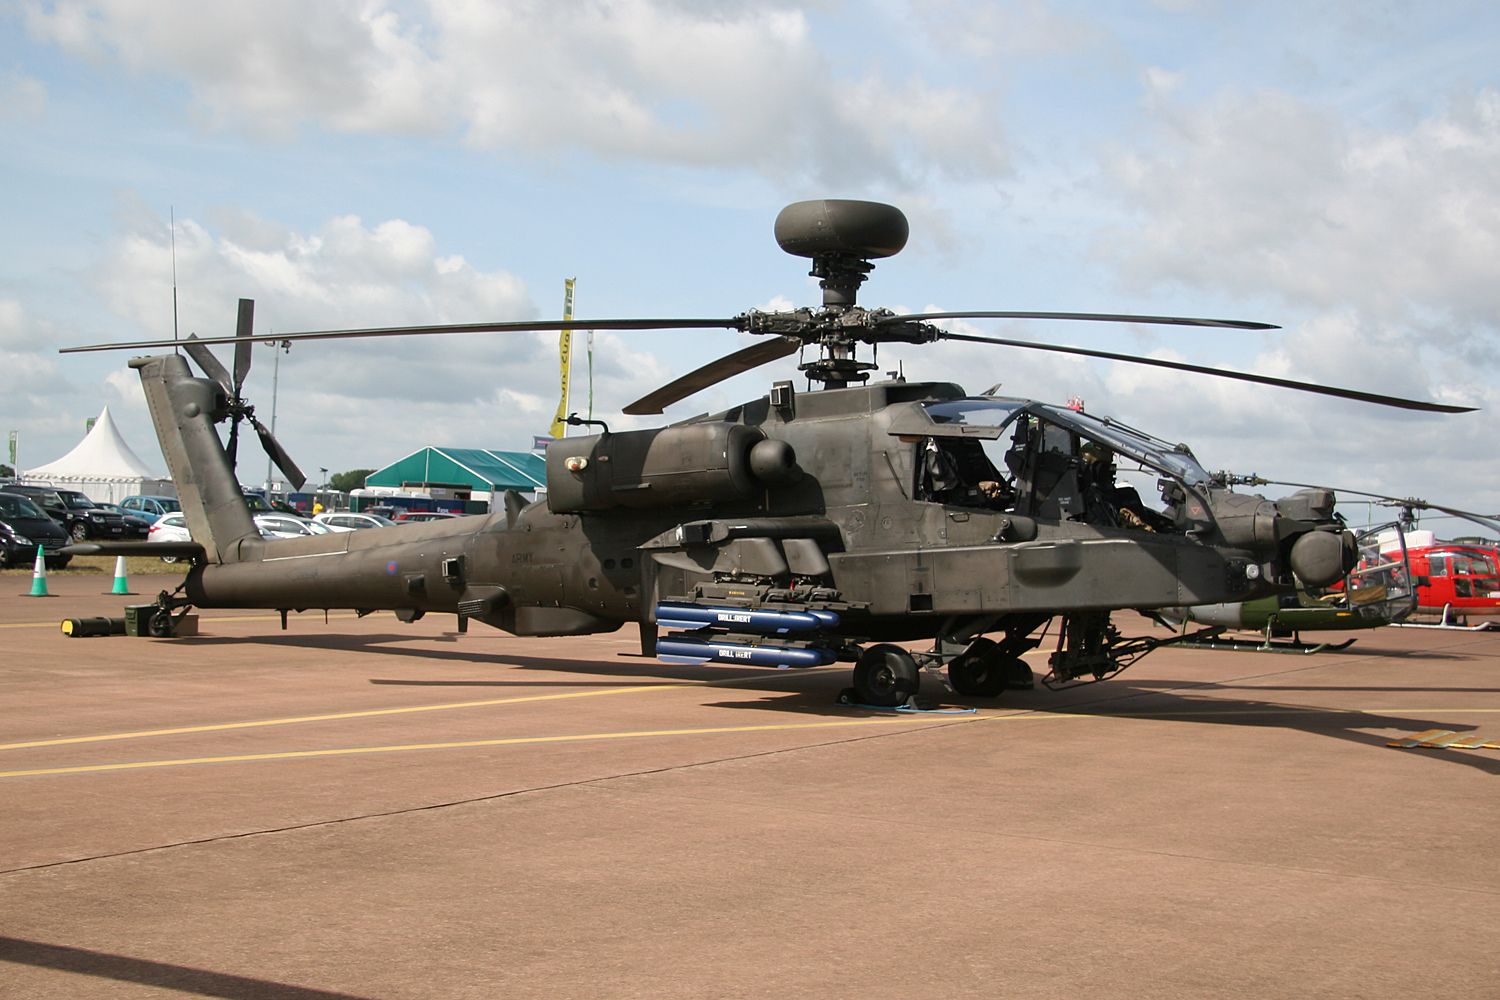 ZJ181 at Fairford in July 2015